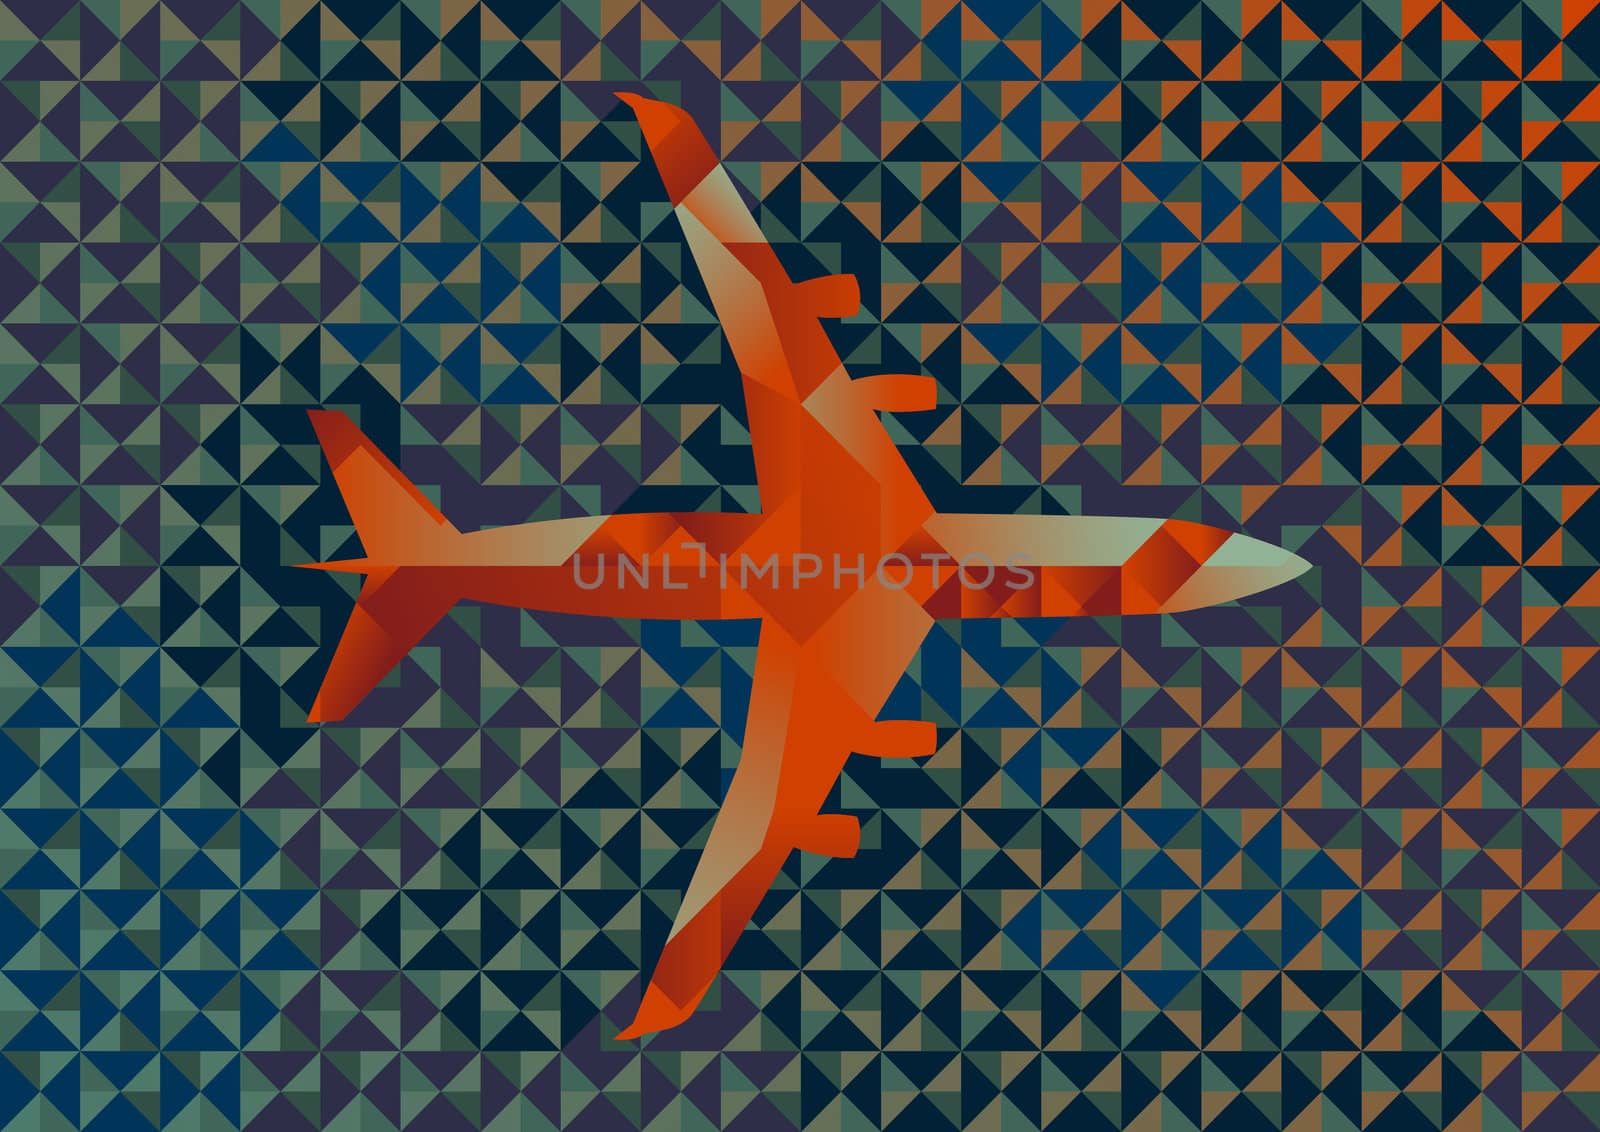 Commercial Airplane Illustration of Interlocking Geometric Shapes (jpegg file also has clipping path)